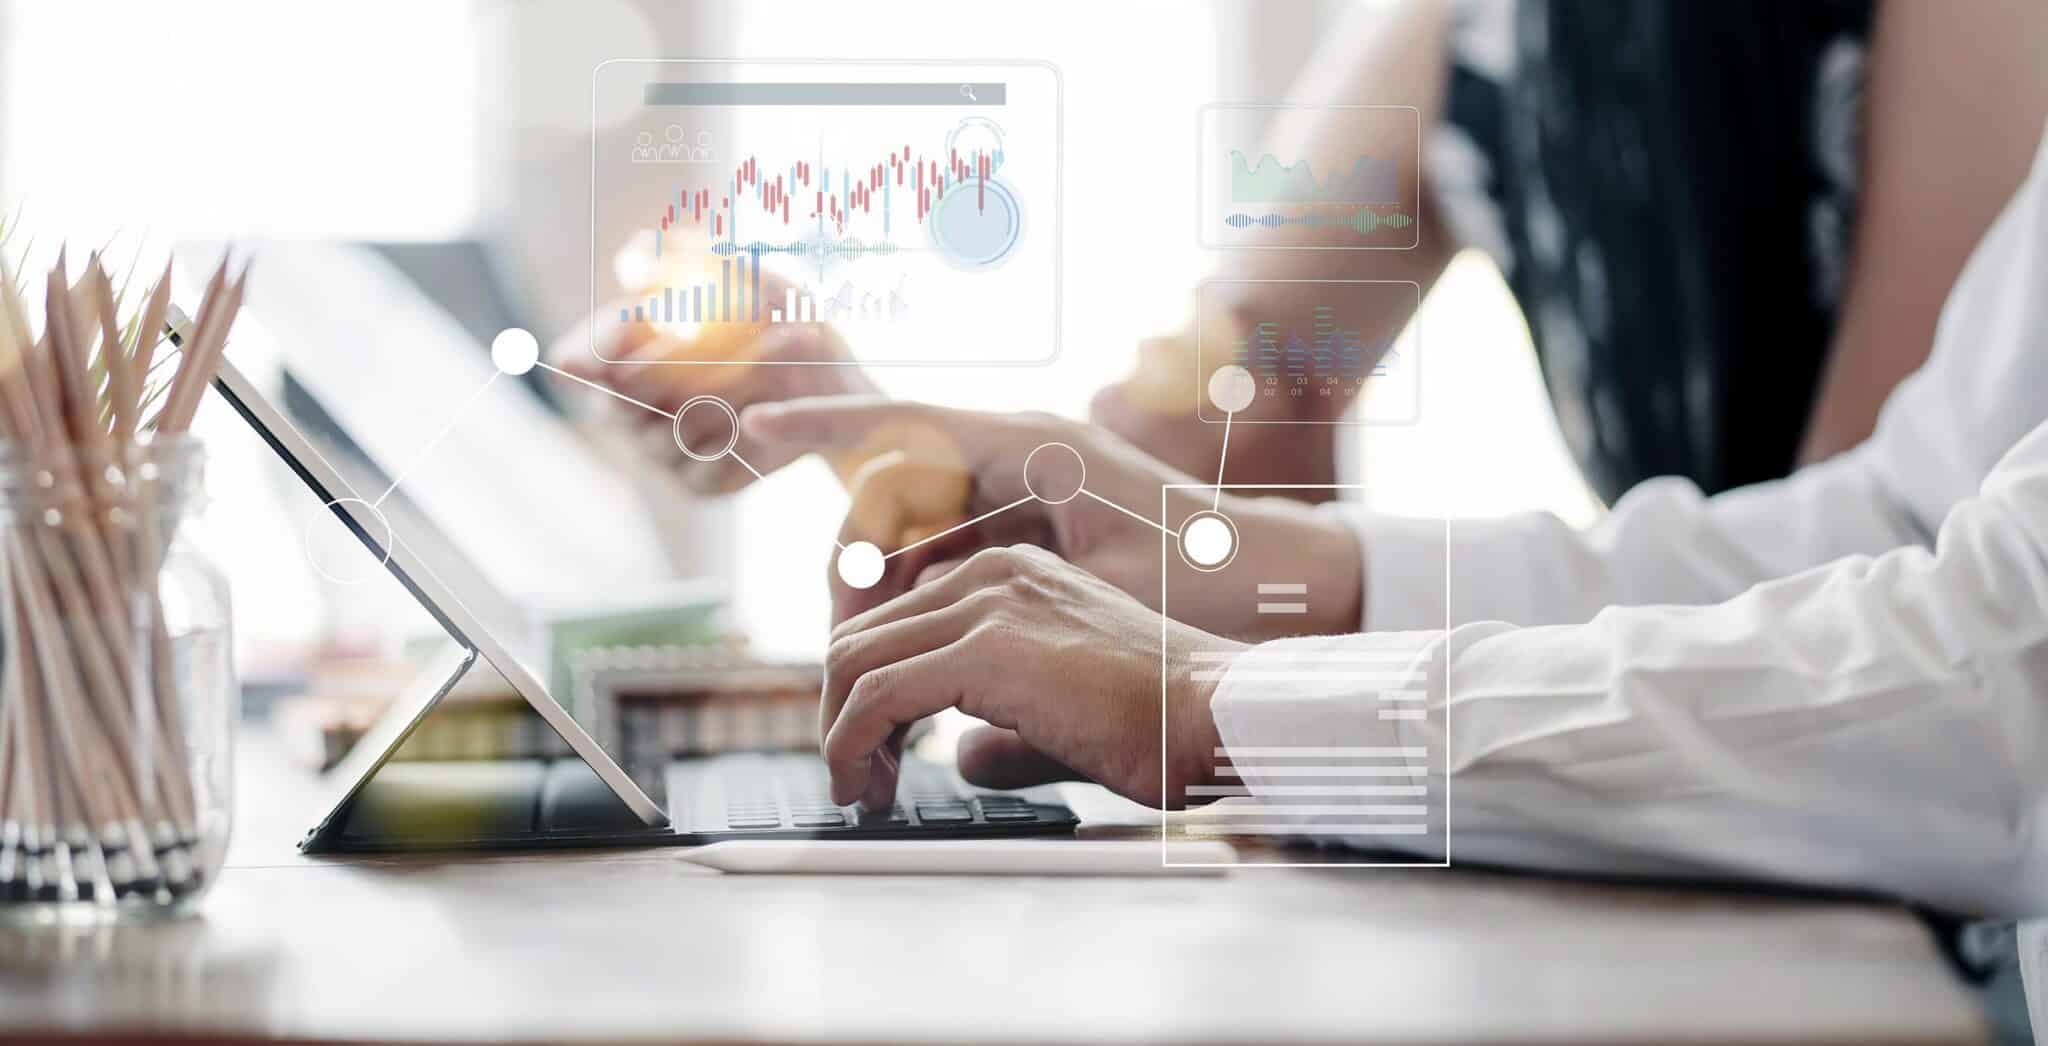 Improve business and efficiency with legal analytics software. Start a free trial by visiting MyCase.com/free-trial today! 